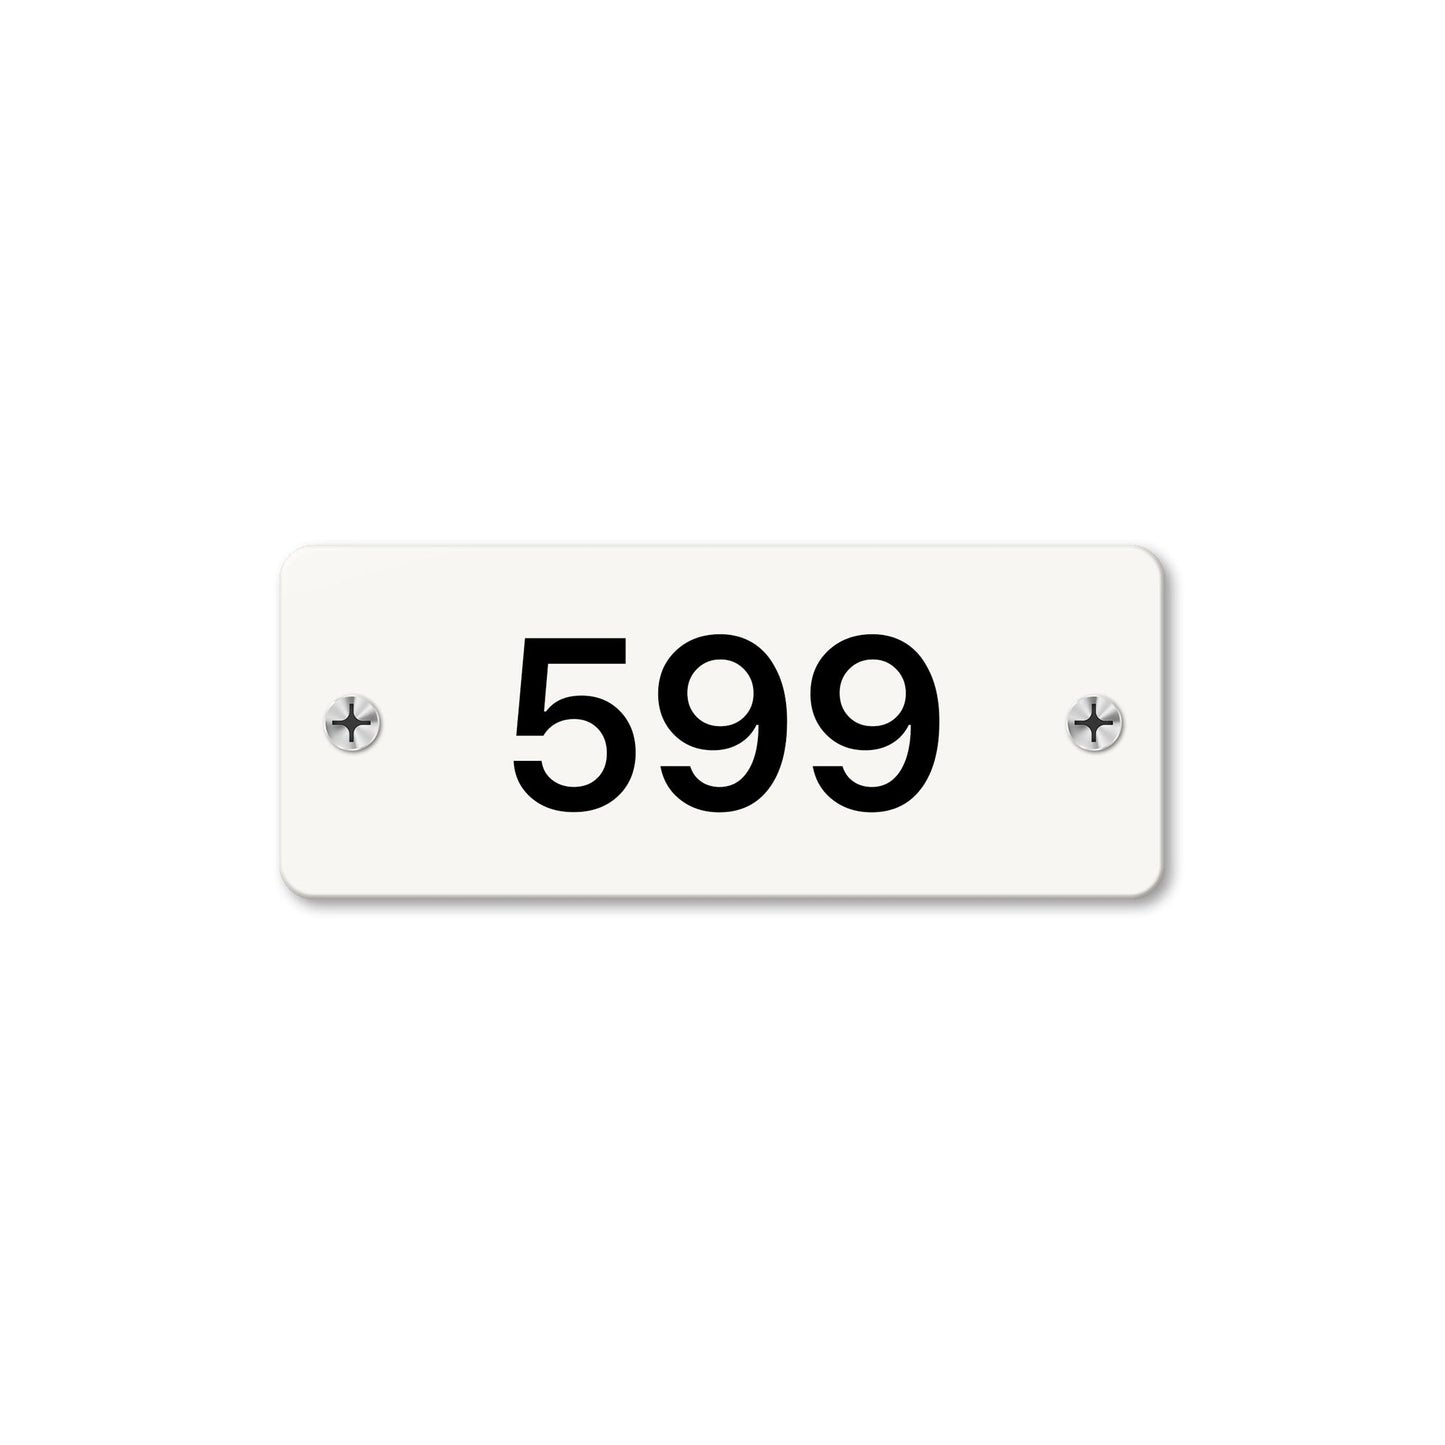 Numeral 599